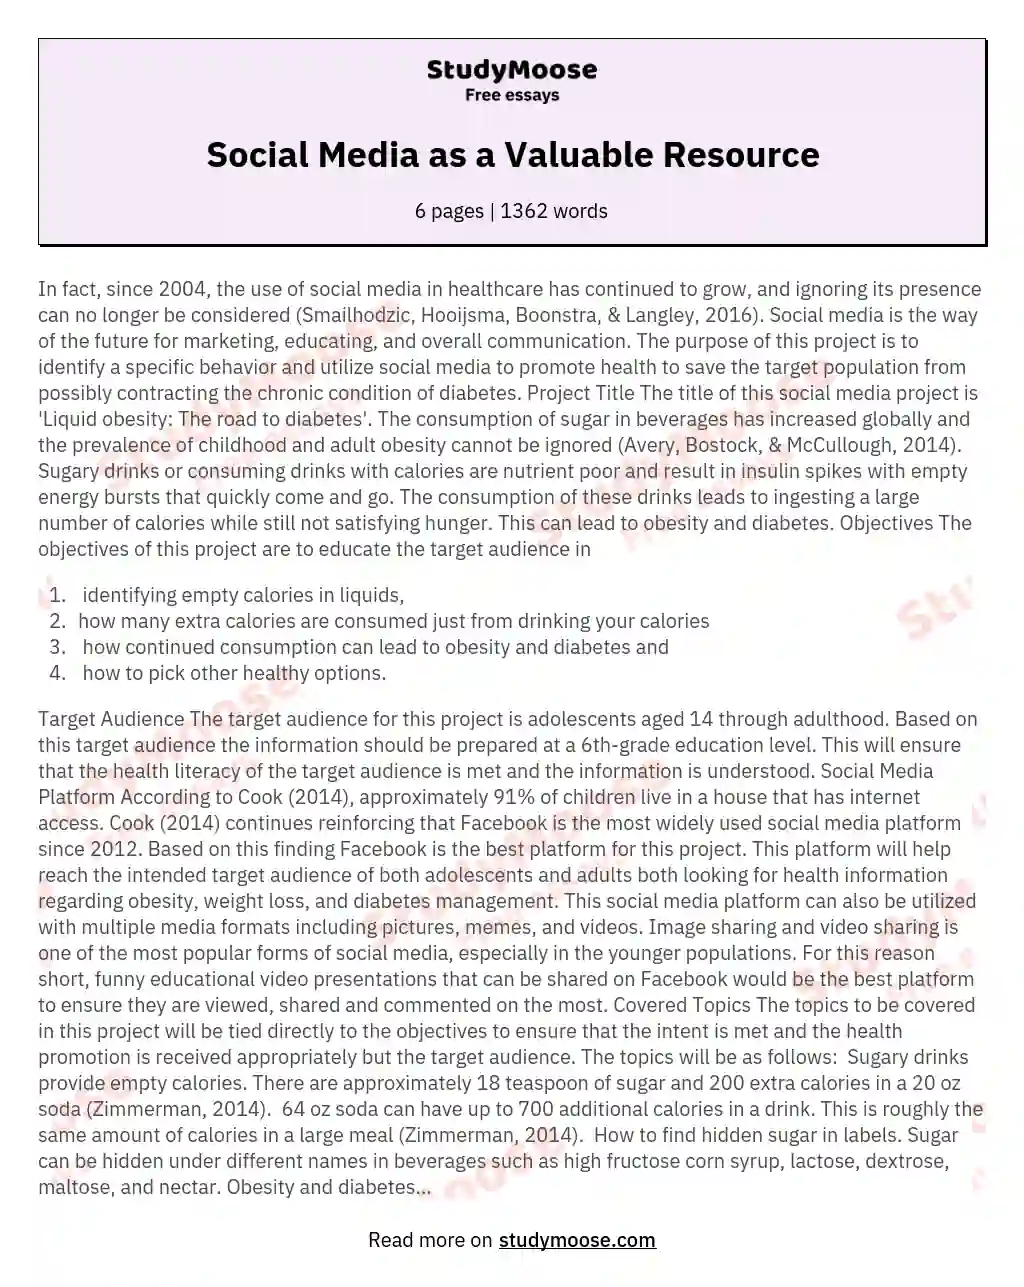 Social Media as a Valuable Resource essay